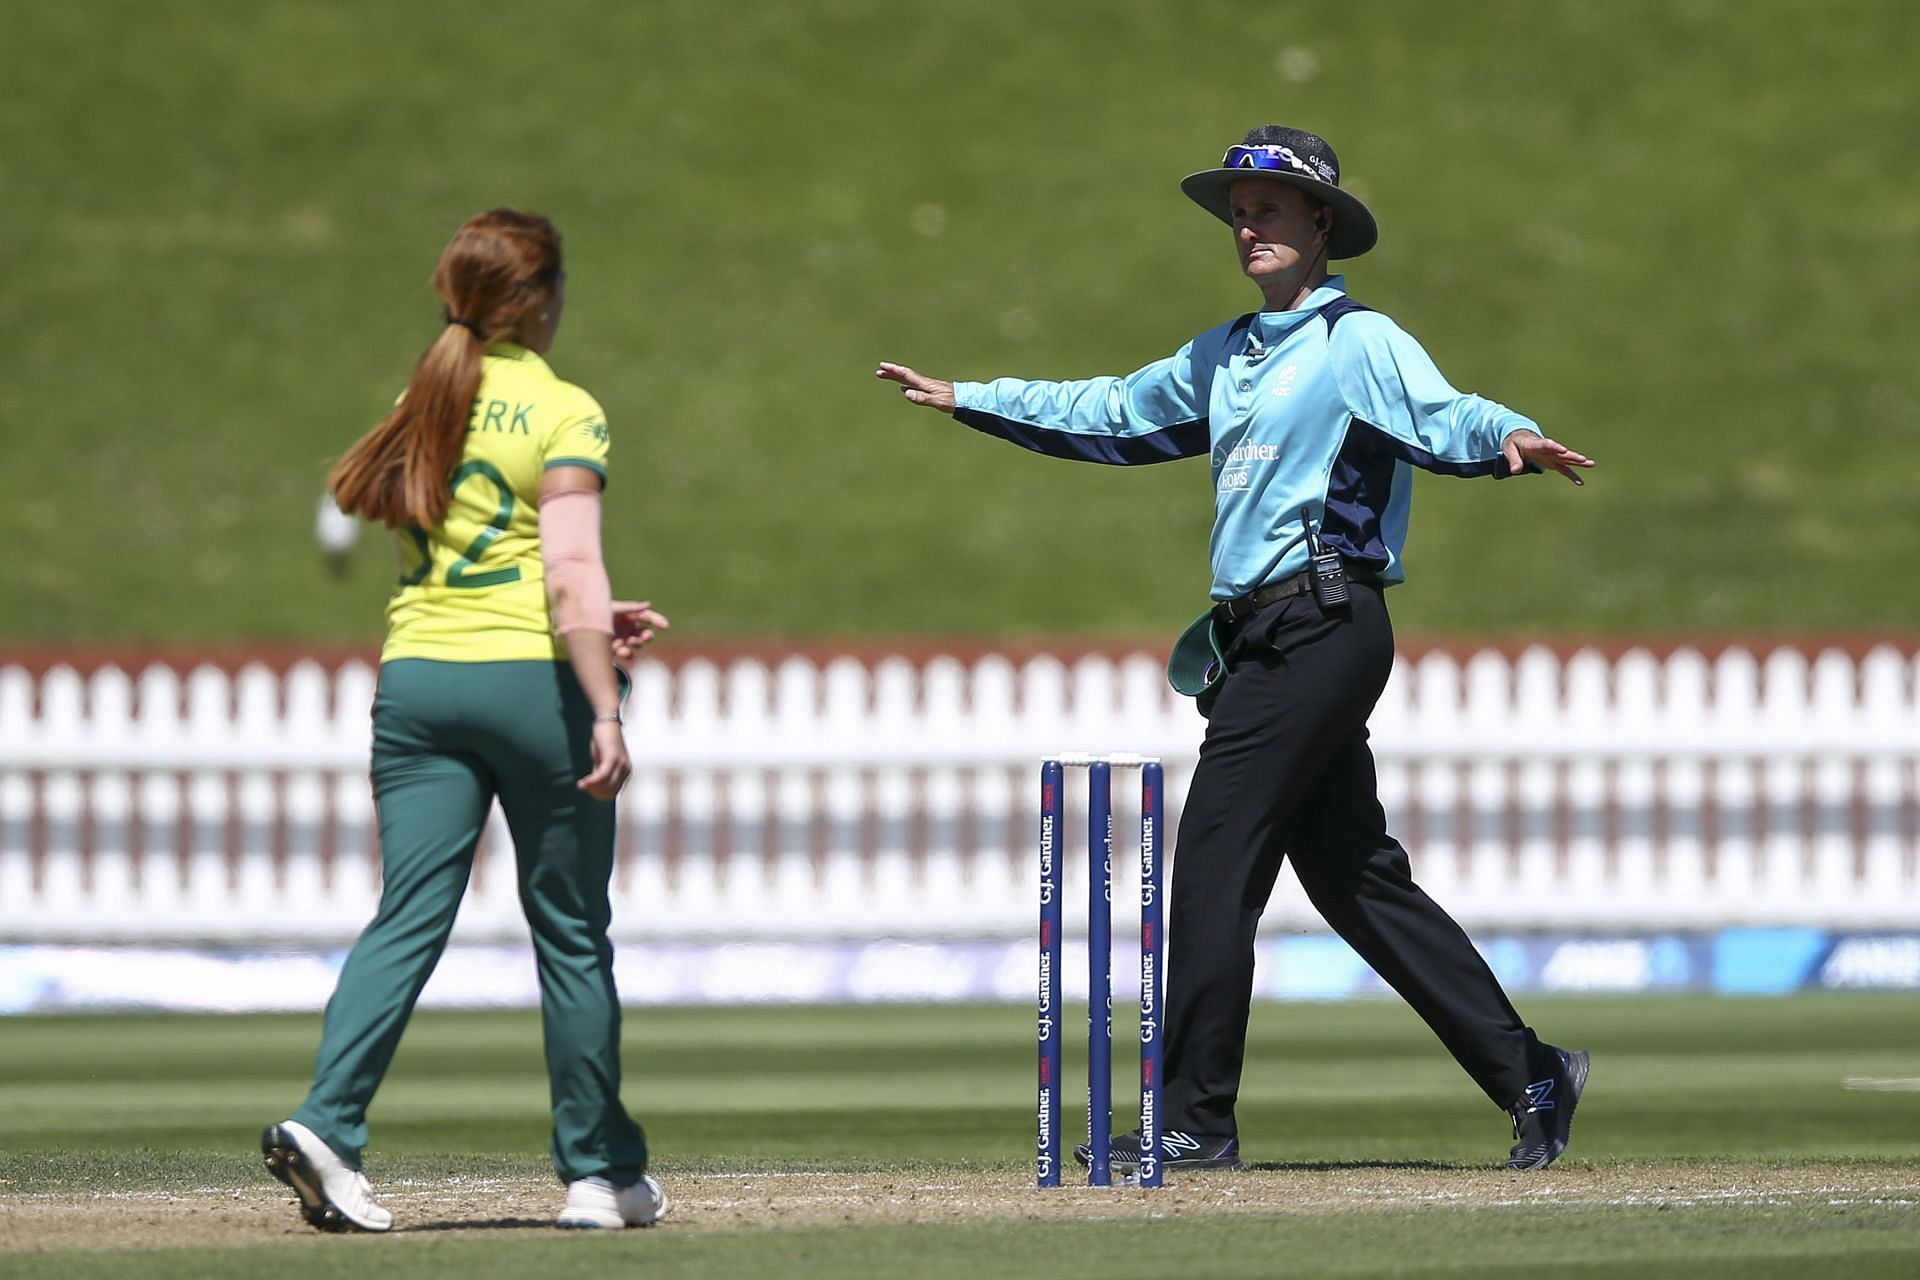 Bowden officiating for Womens T20 Cricket - New Zealand v South Africa